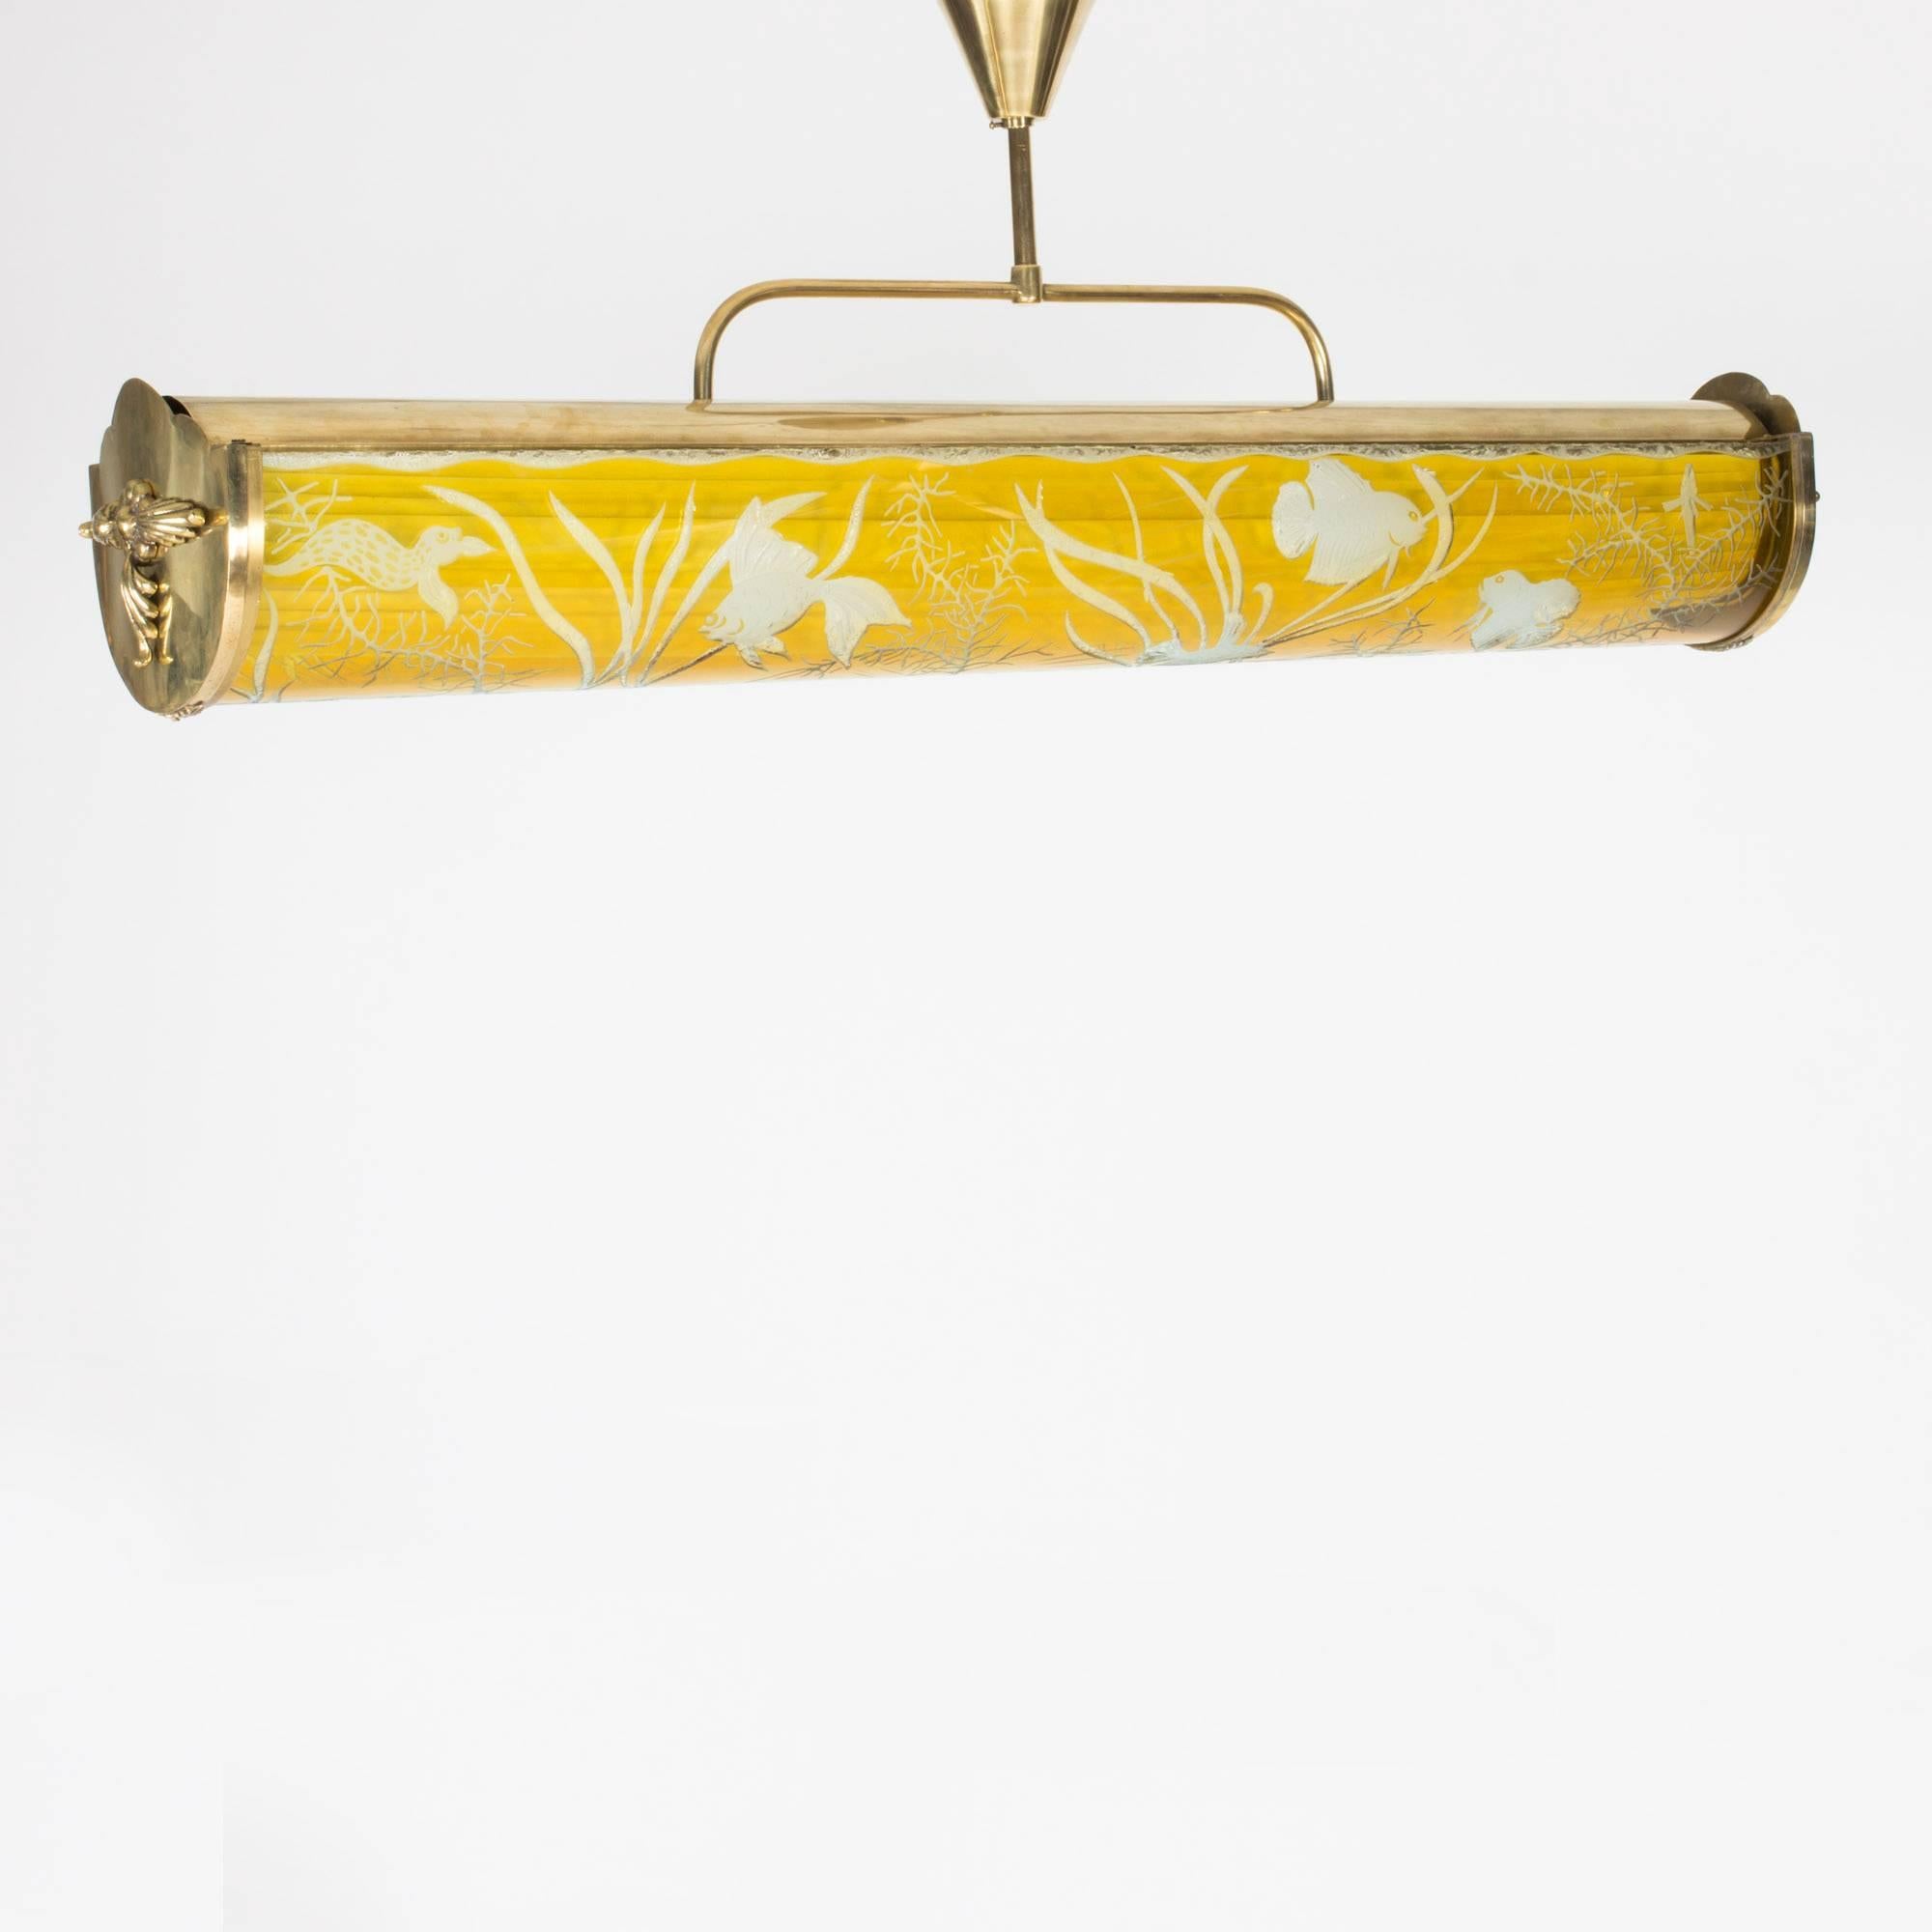 Incredibly beautiful ceiling light, made in Sweden in the 1940s. Made of brass with ornamental decorations on the ends and yellow glass that has a cut underwater motif. The top rims of the glass have a subtle wavy shape along the length where the